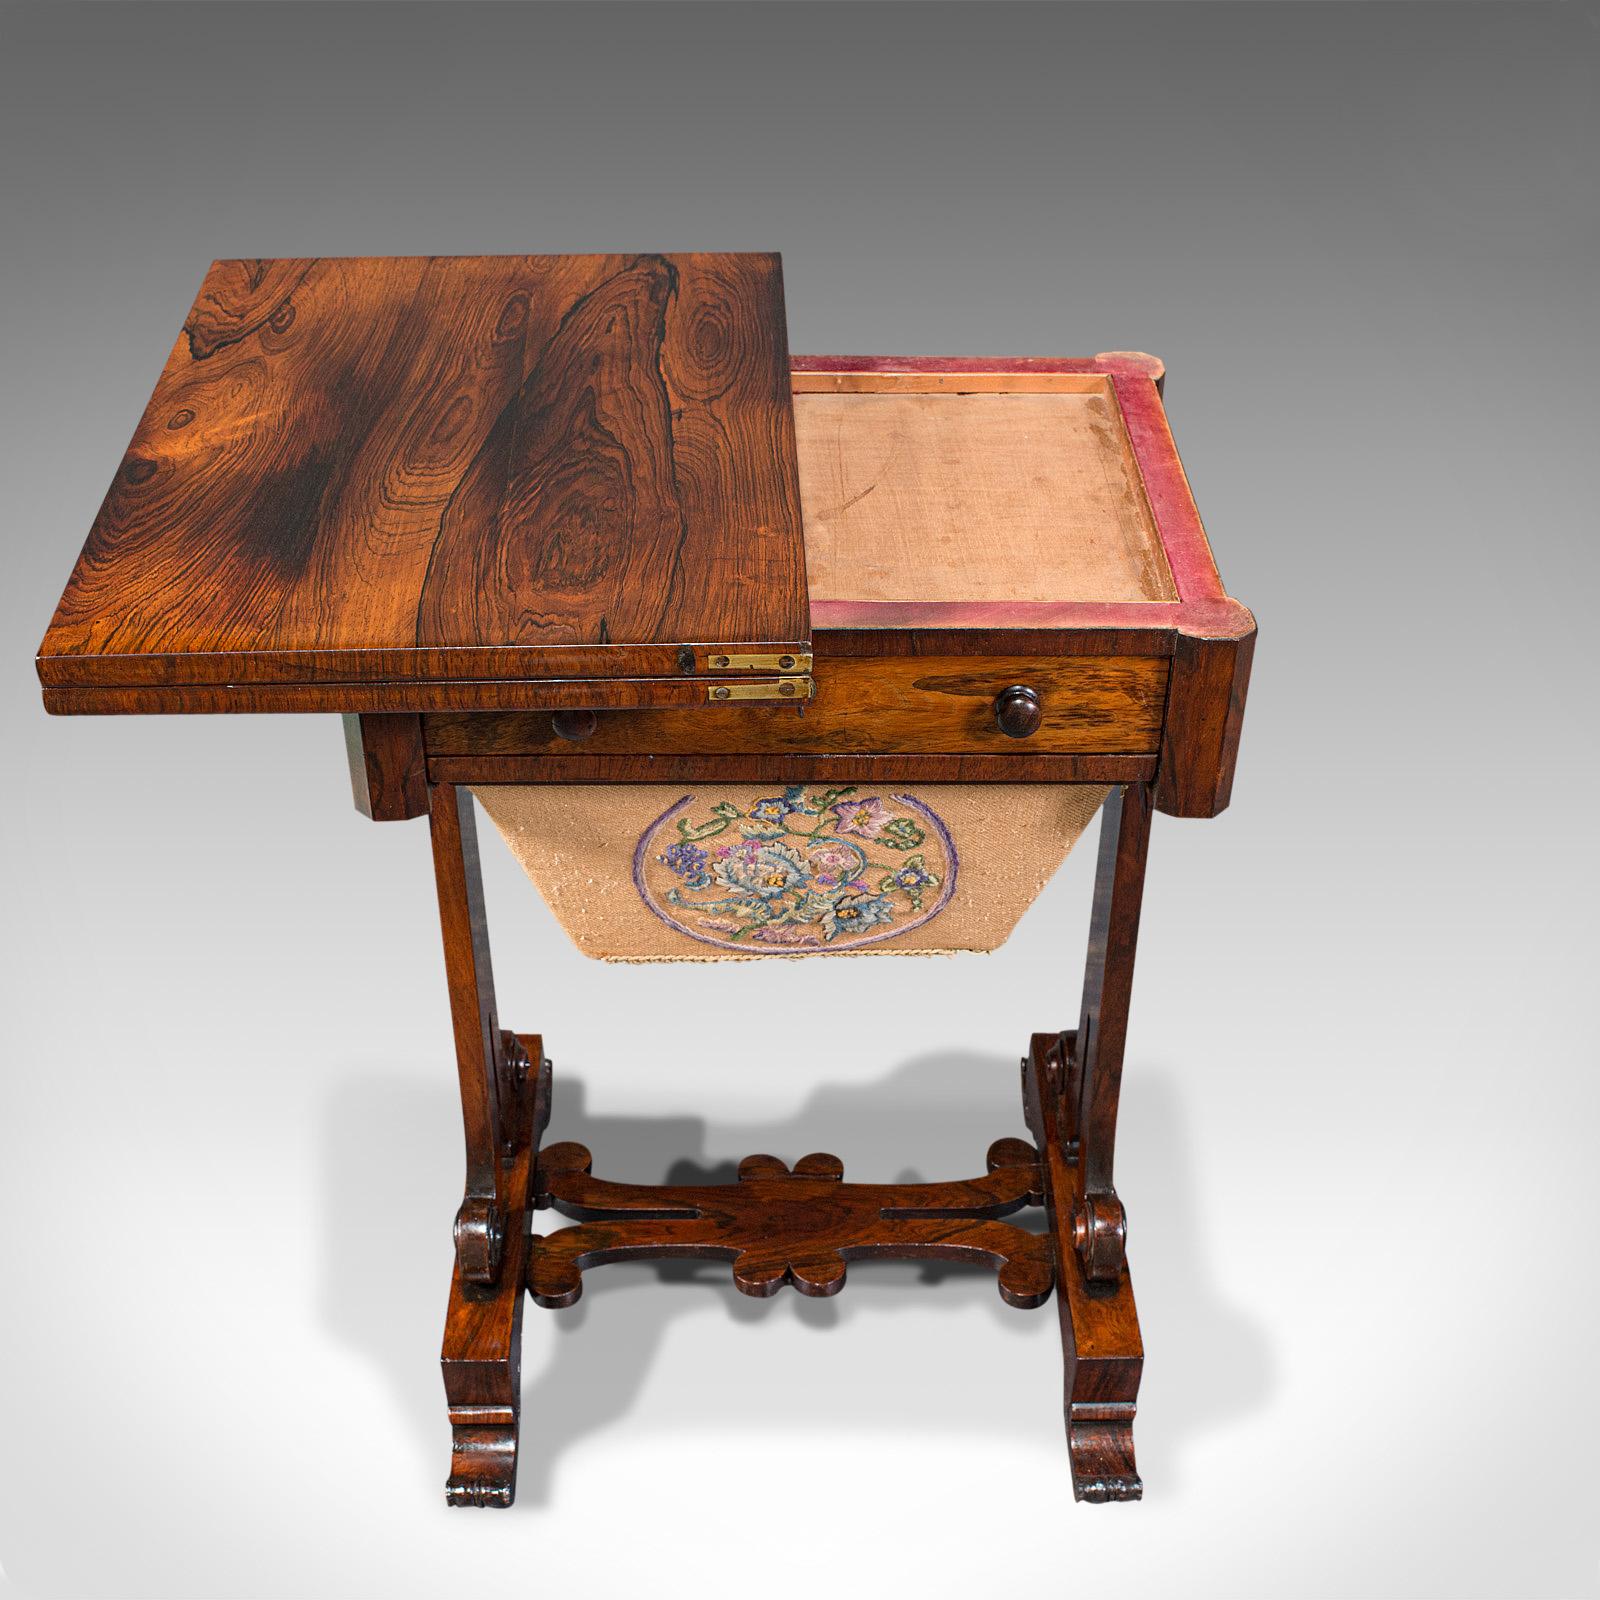 Antique Fold Over Games Table, English, Rosewood, Chess, Cards, Regency, C.1820 For Sale 1